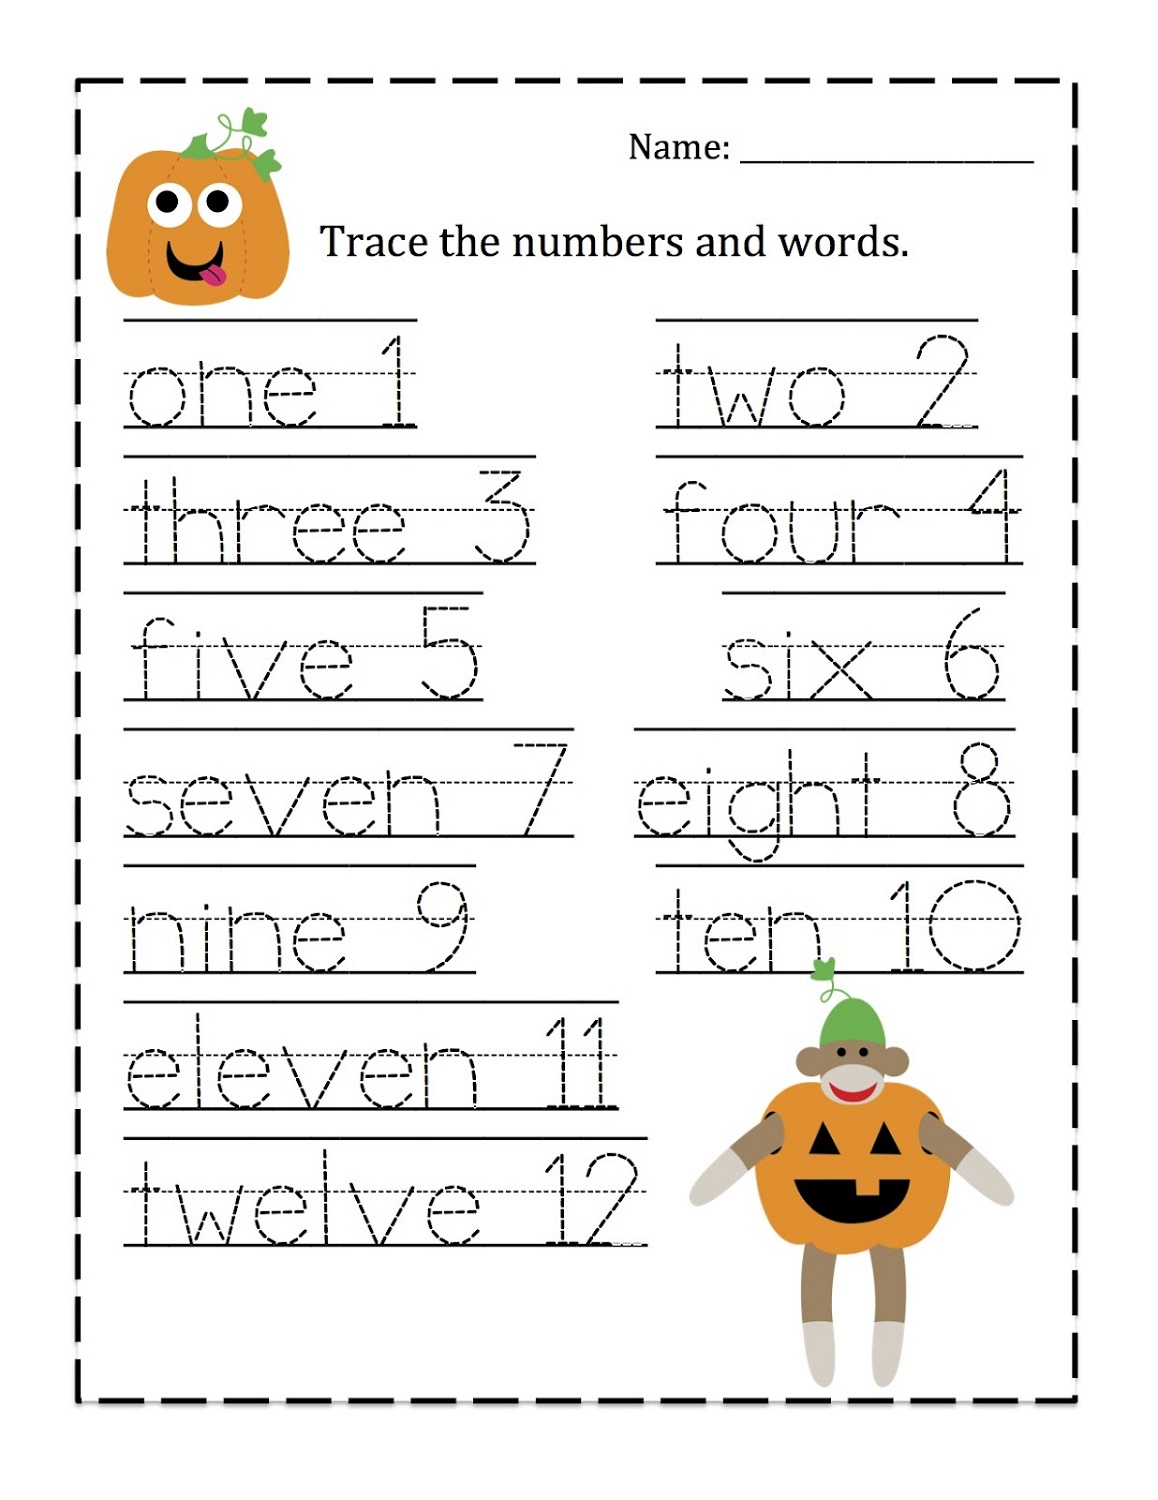 free-printable-for-tracing-letters-numbers-tracing-worksheets-free